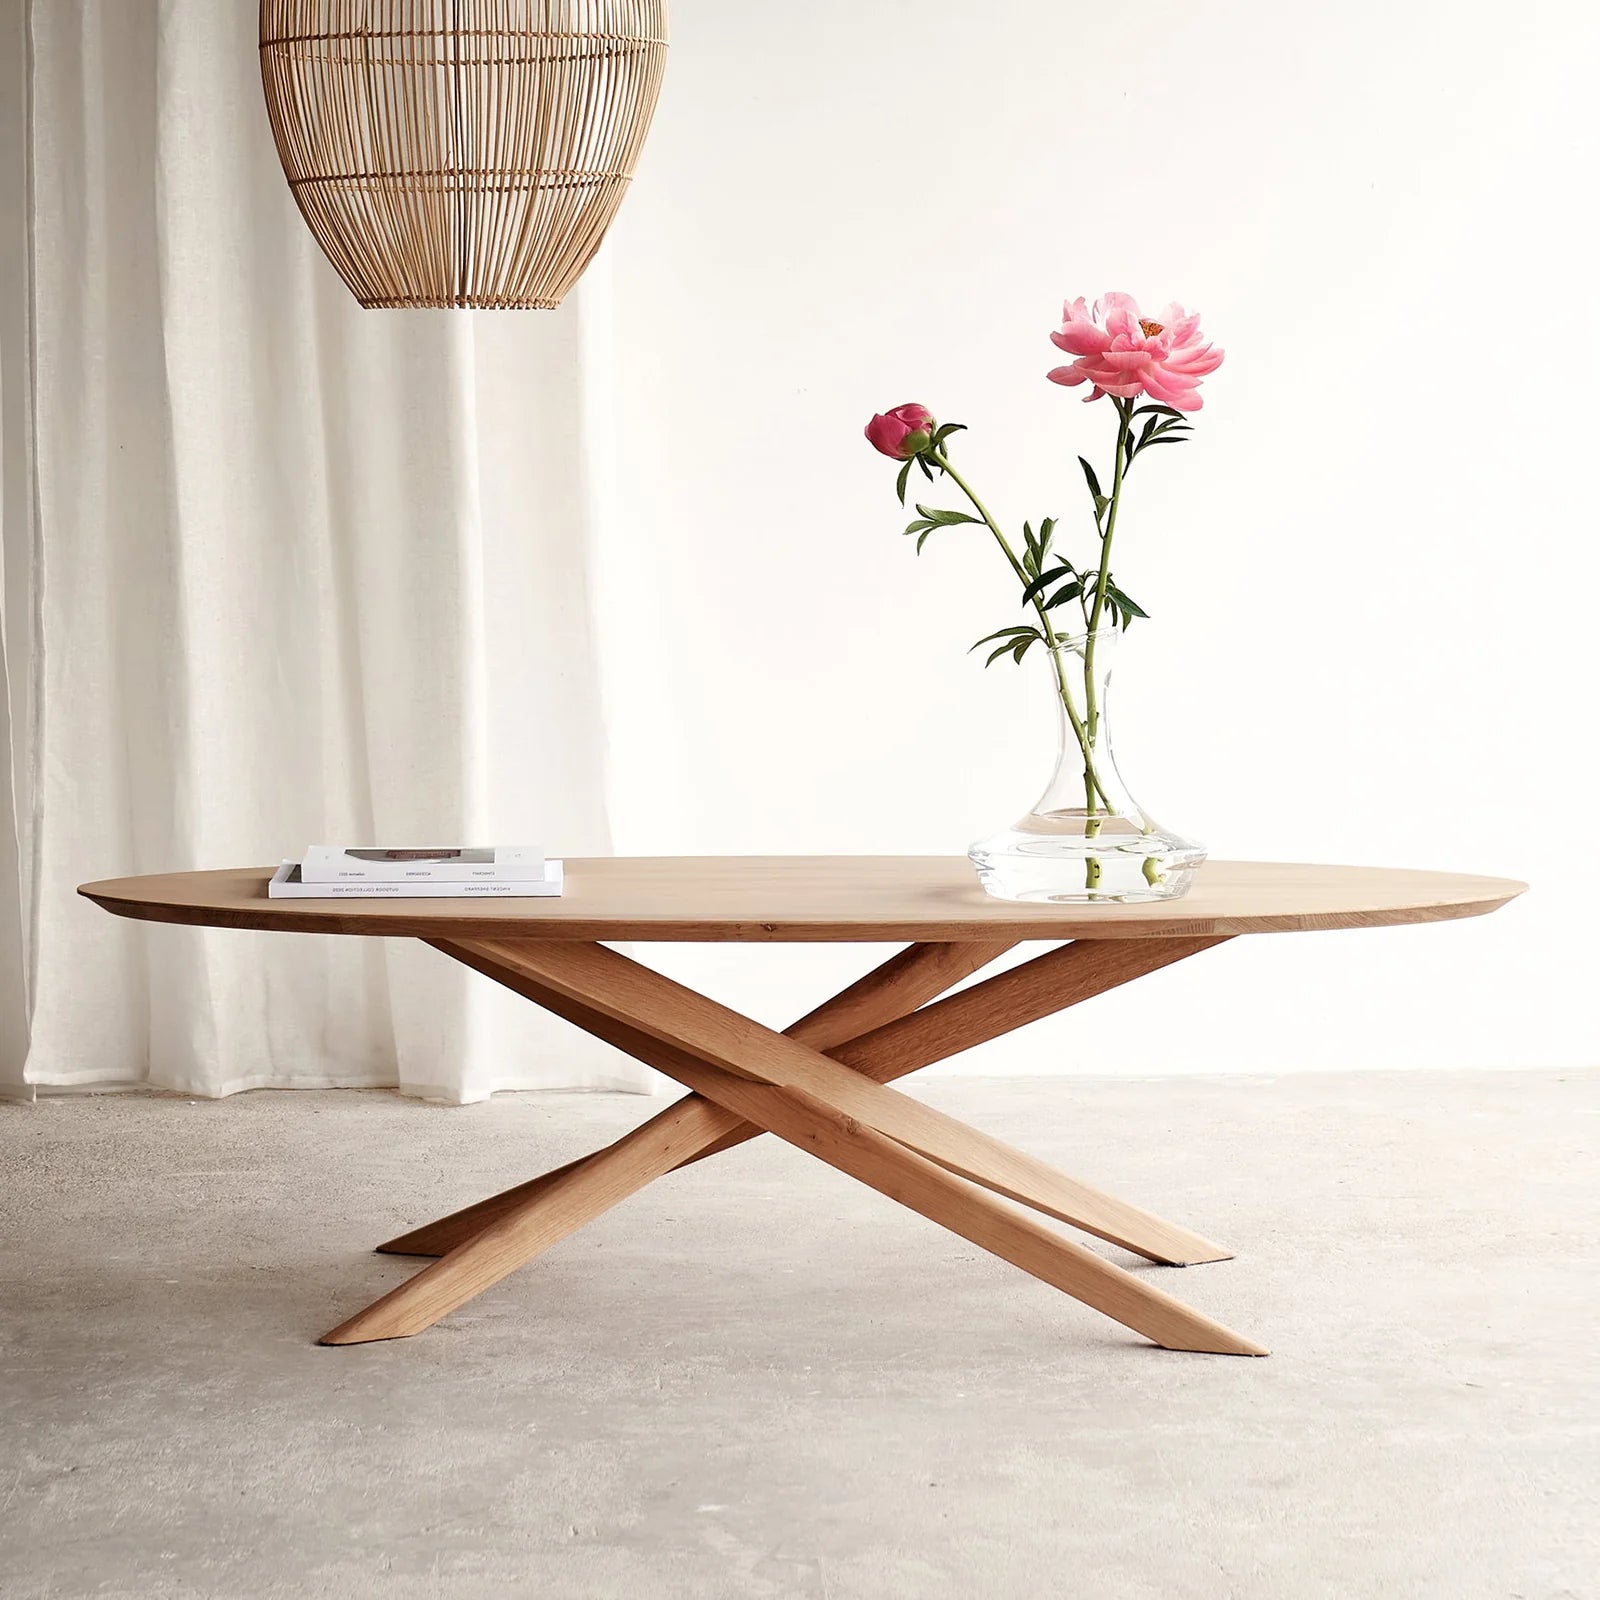 Ethnicraft Oak Mikado Oval Coffee Table available from Make Your House A Home, Bendigo, Victoria, Australia